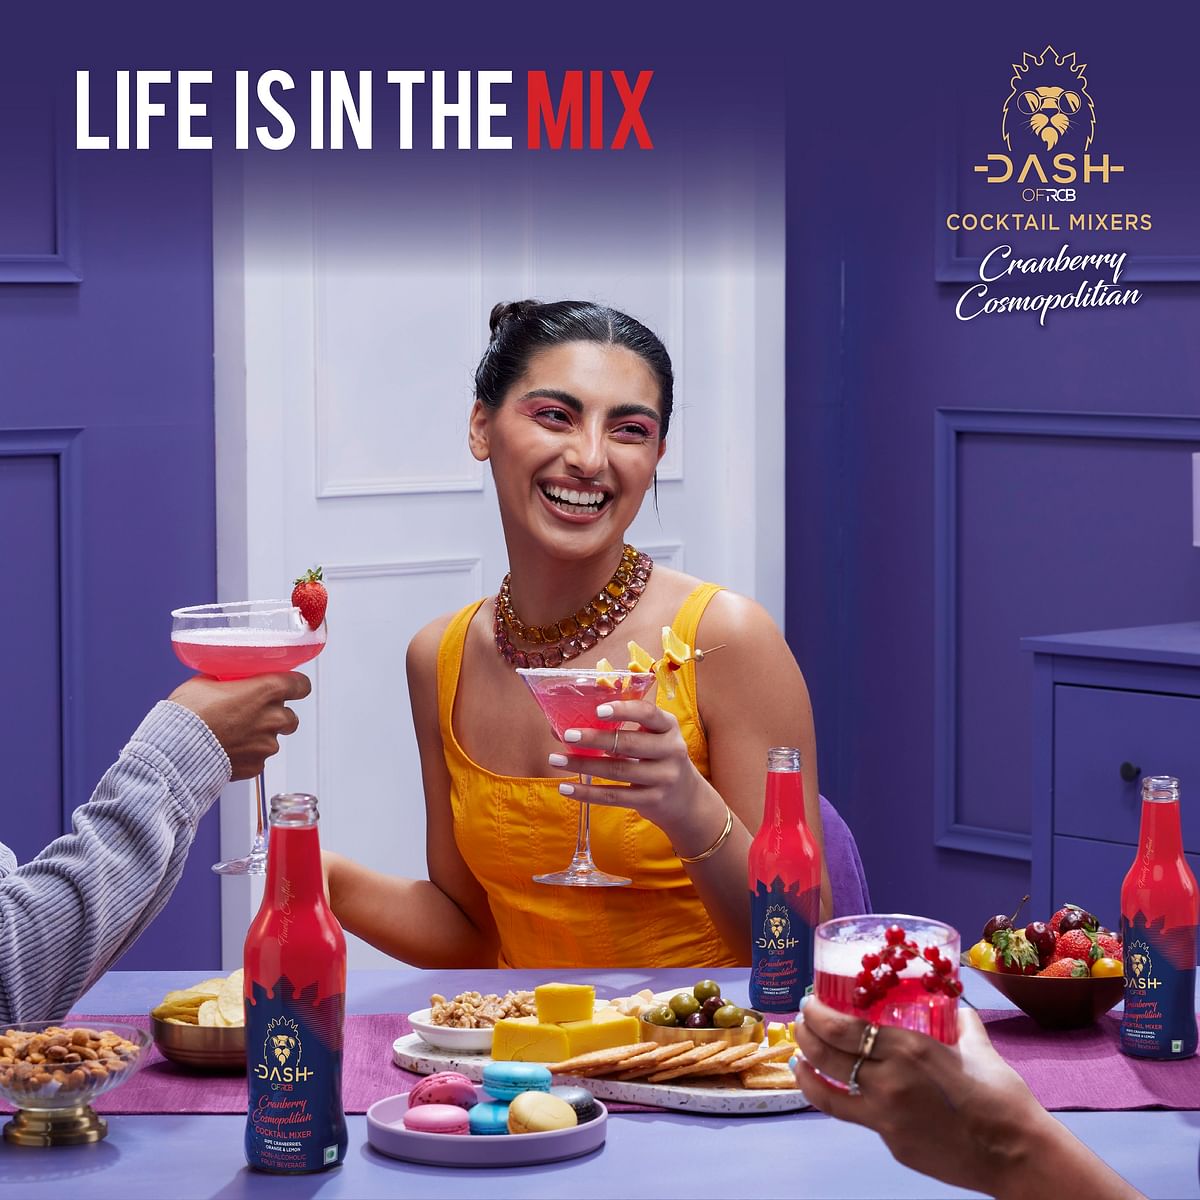 RCB launches 'Dash of RCB' non-alcoholic mixers with 'Life is in the Mix' campaign